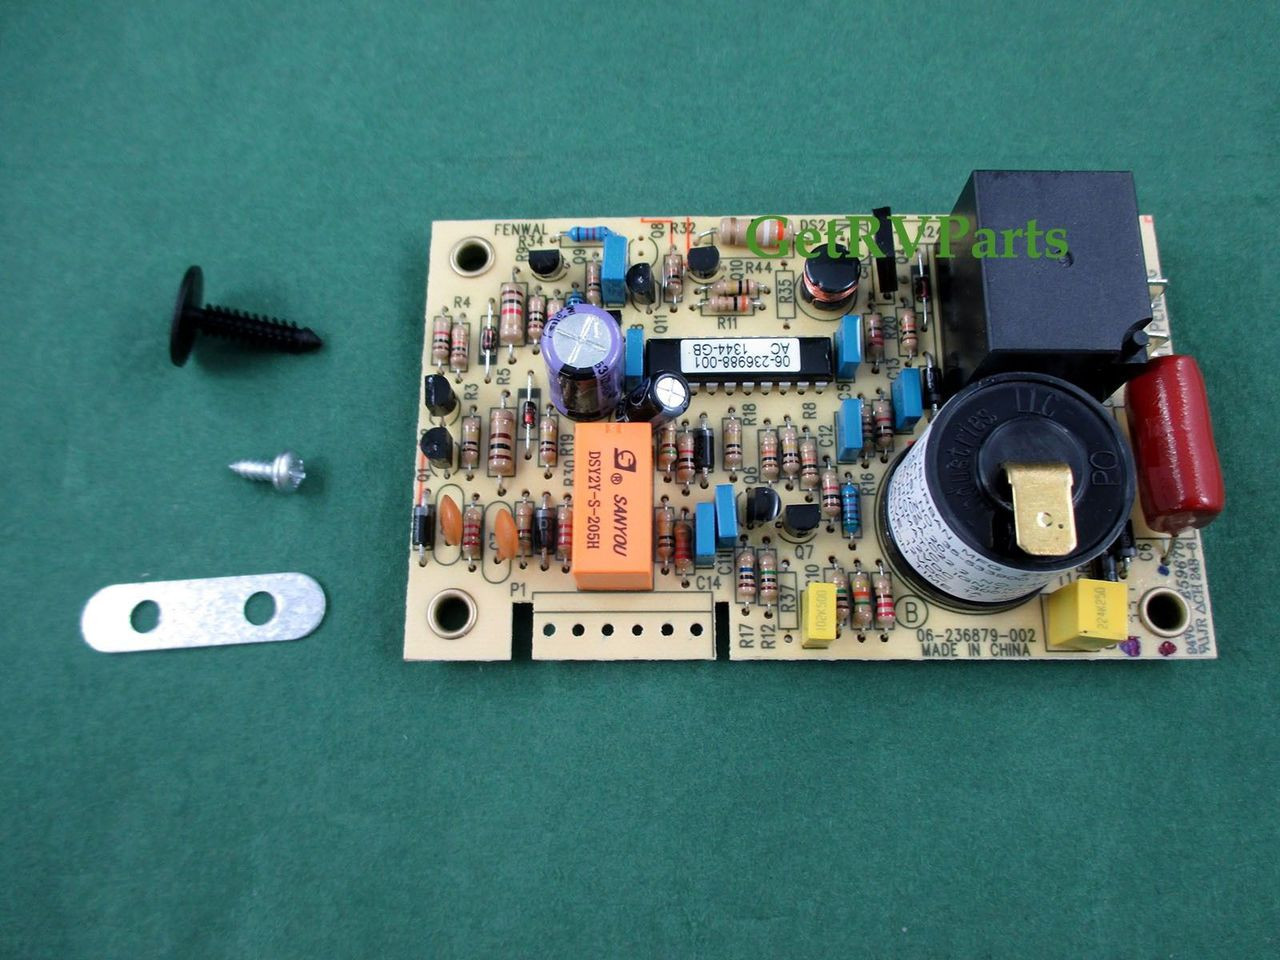 12 Volt DC Furnace Water Heater Fan Control Board Replacement Circuit Board For All Suburban Furnace And Water Heater Circuit Boards Including 520871 520814 520820